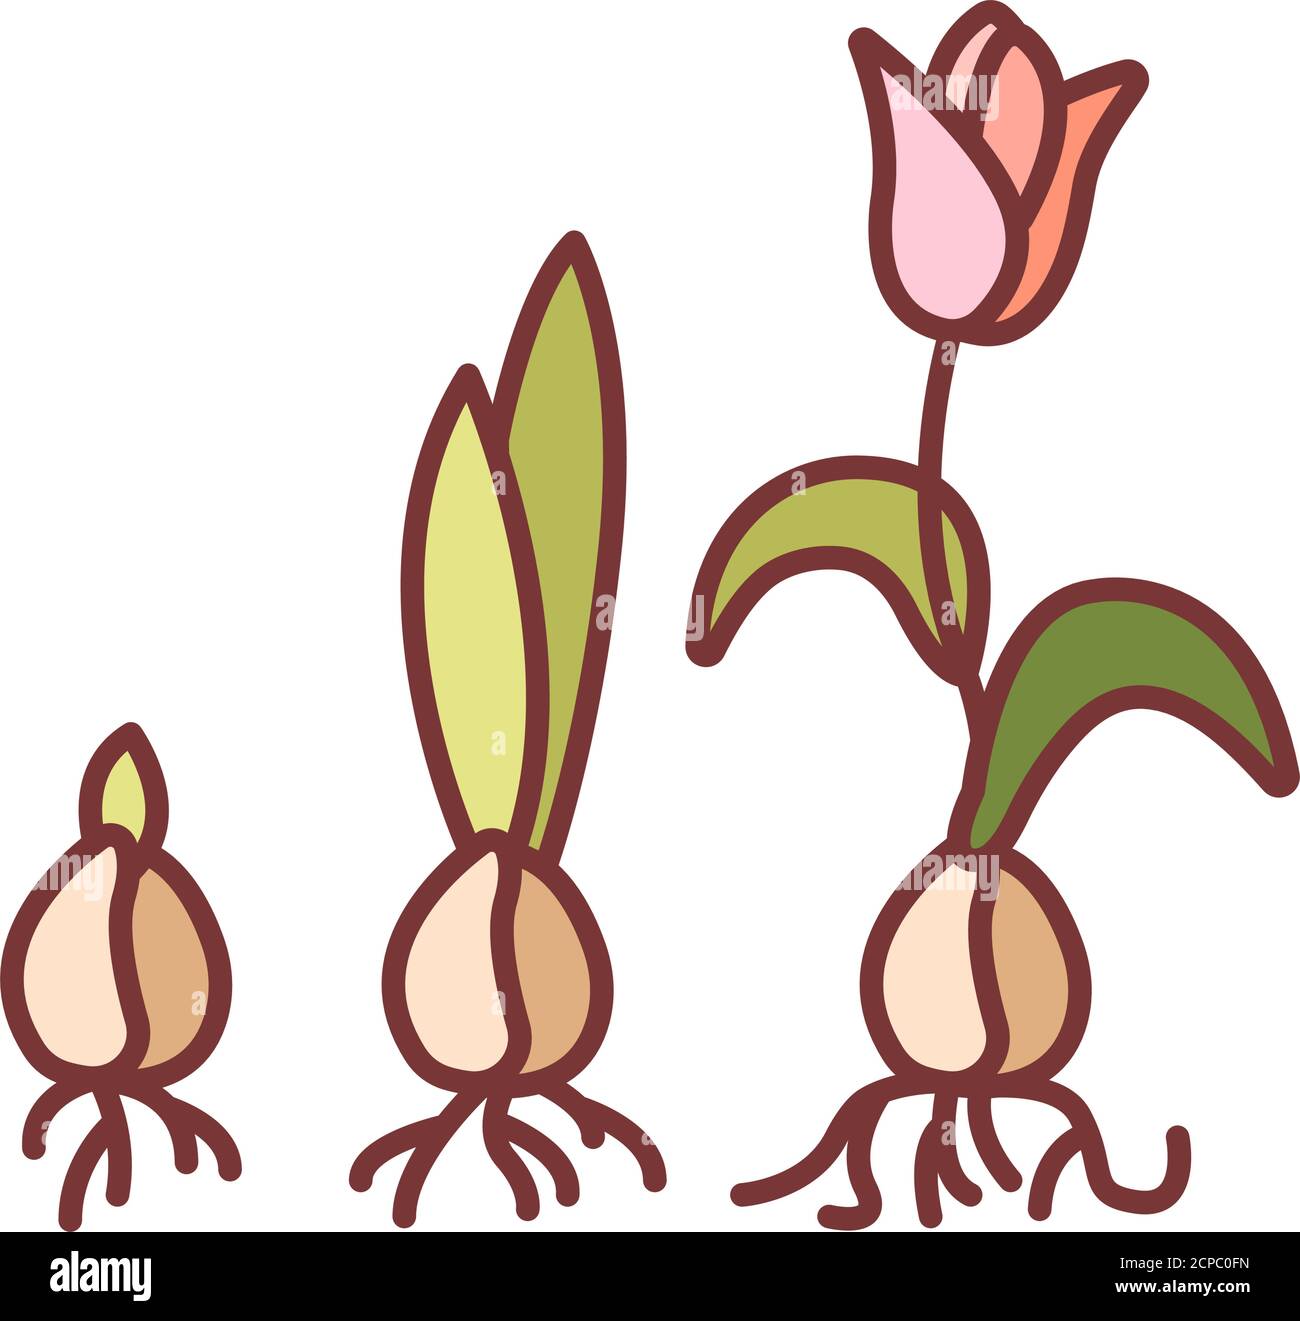 Growing plant stages color line icon. The seed, germination, growth, reproduction, pollination, and seed spreading. Pictogram for web page, mobile app Stock Vector